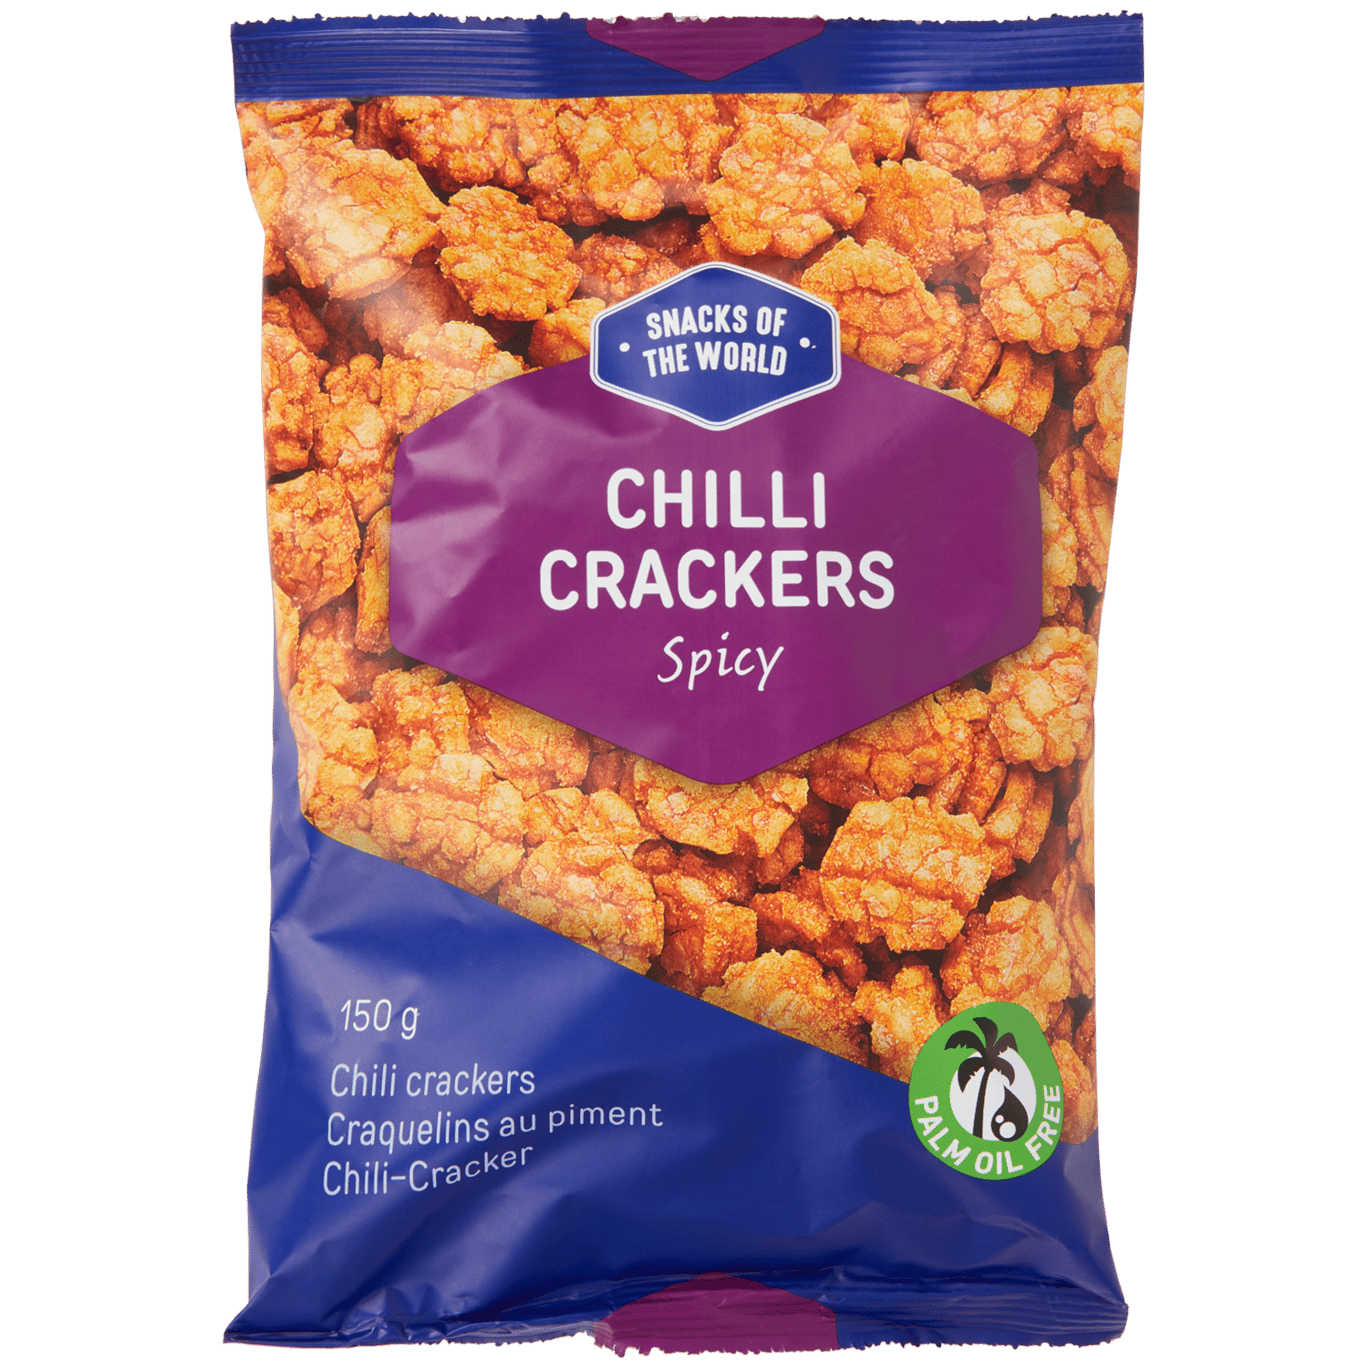 Chilli Crackers Snacks of the World Spicy